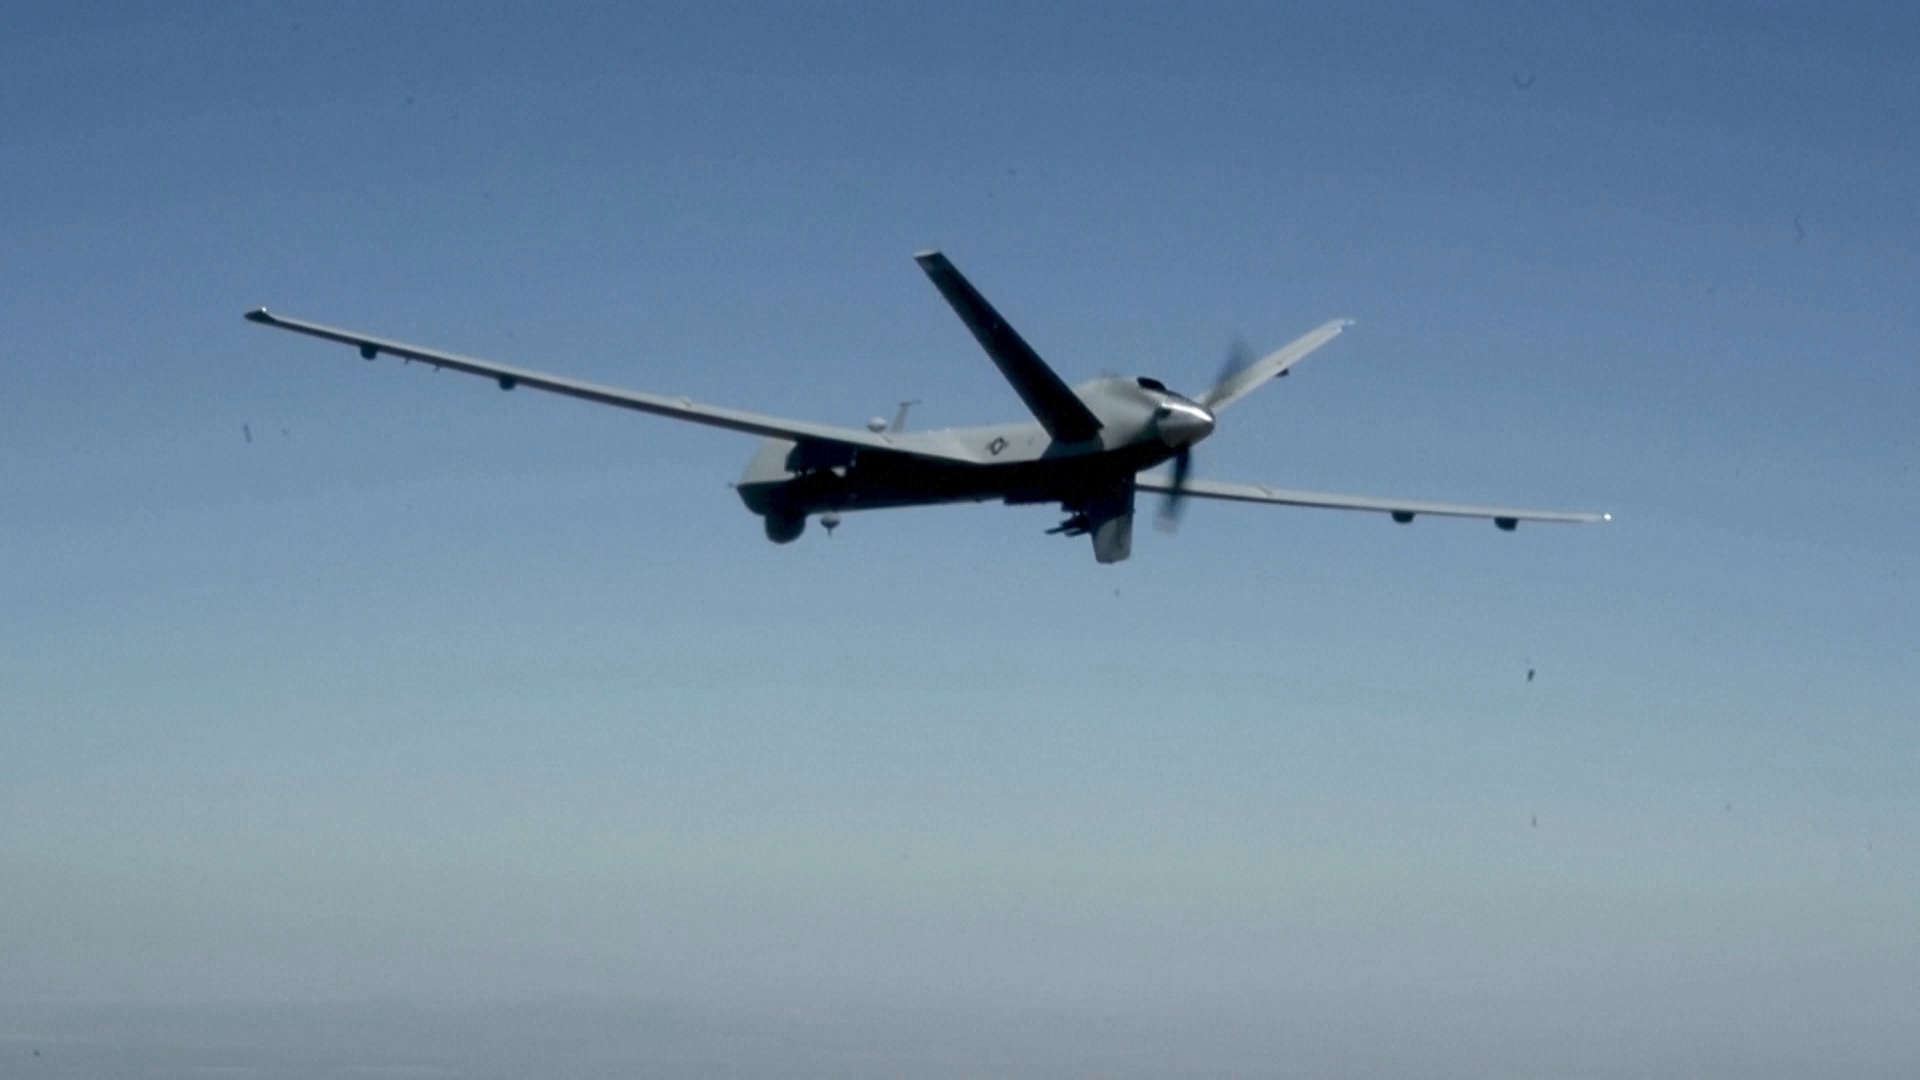 A U.S. MQ-9 Reaper drone went into the Black Sea on Tuesday. /Reuters